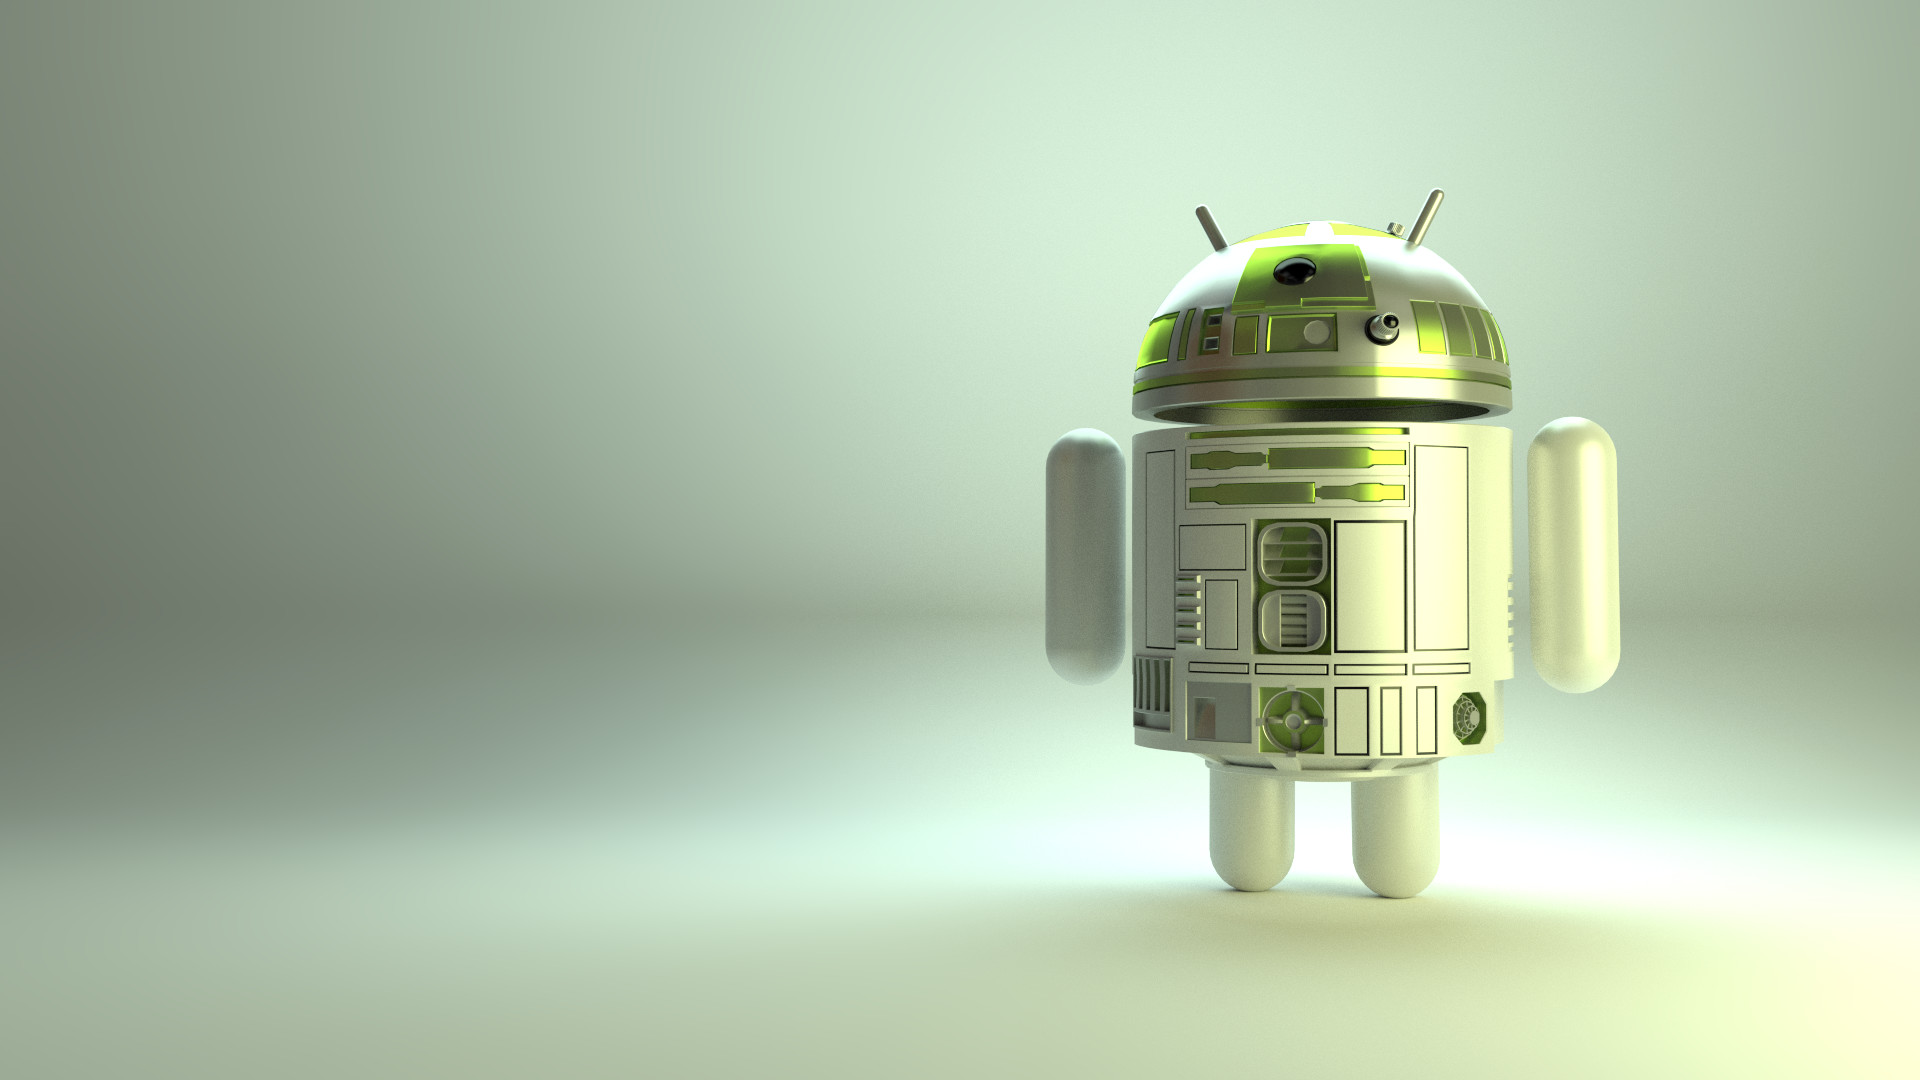 1920x1080 ... Android Robot, R2-D2 Style by ILikePixels